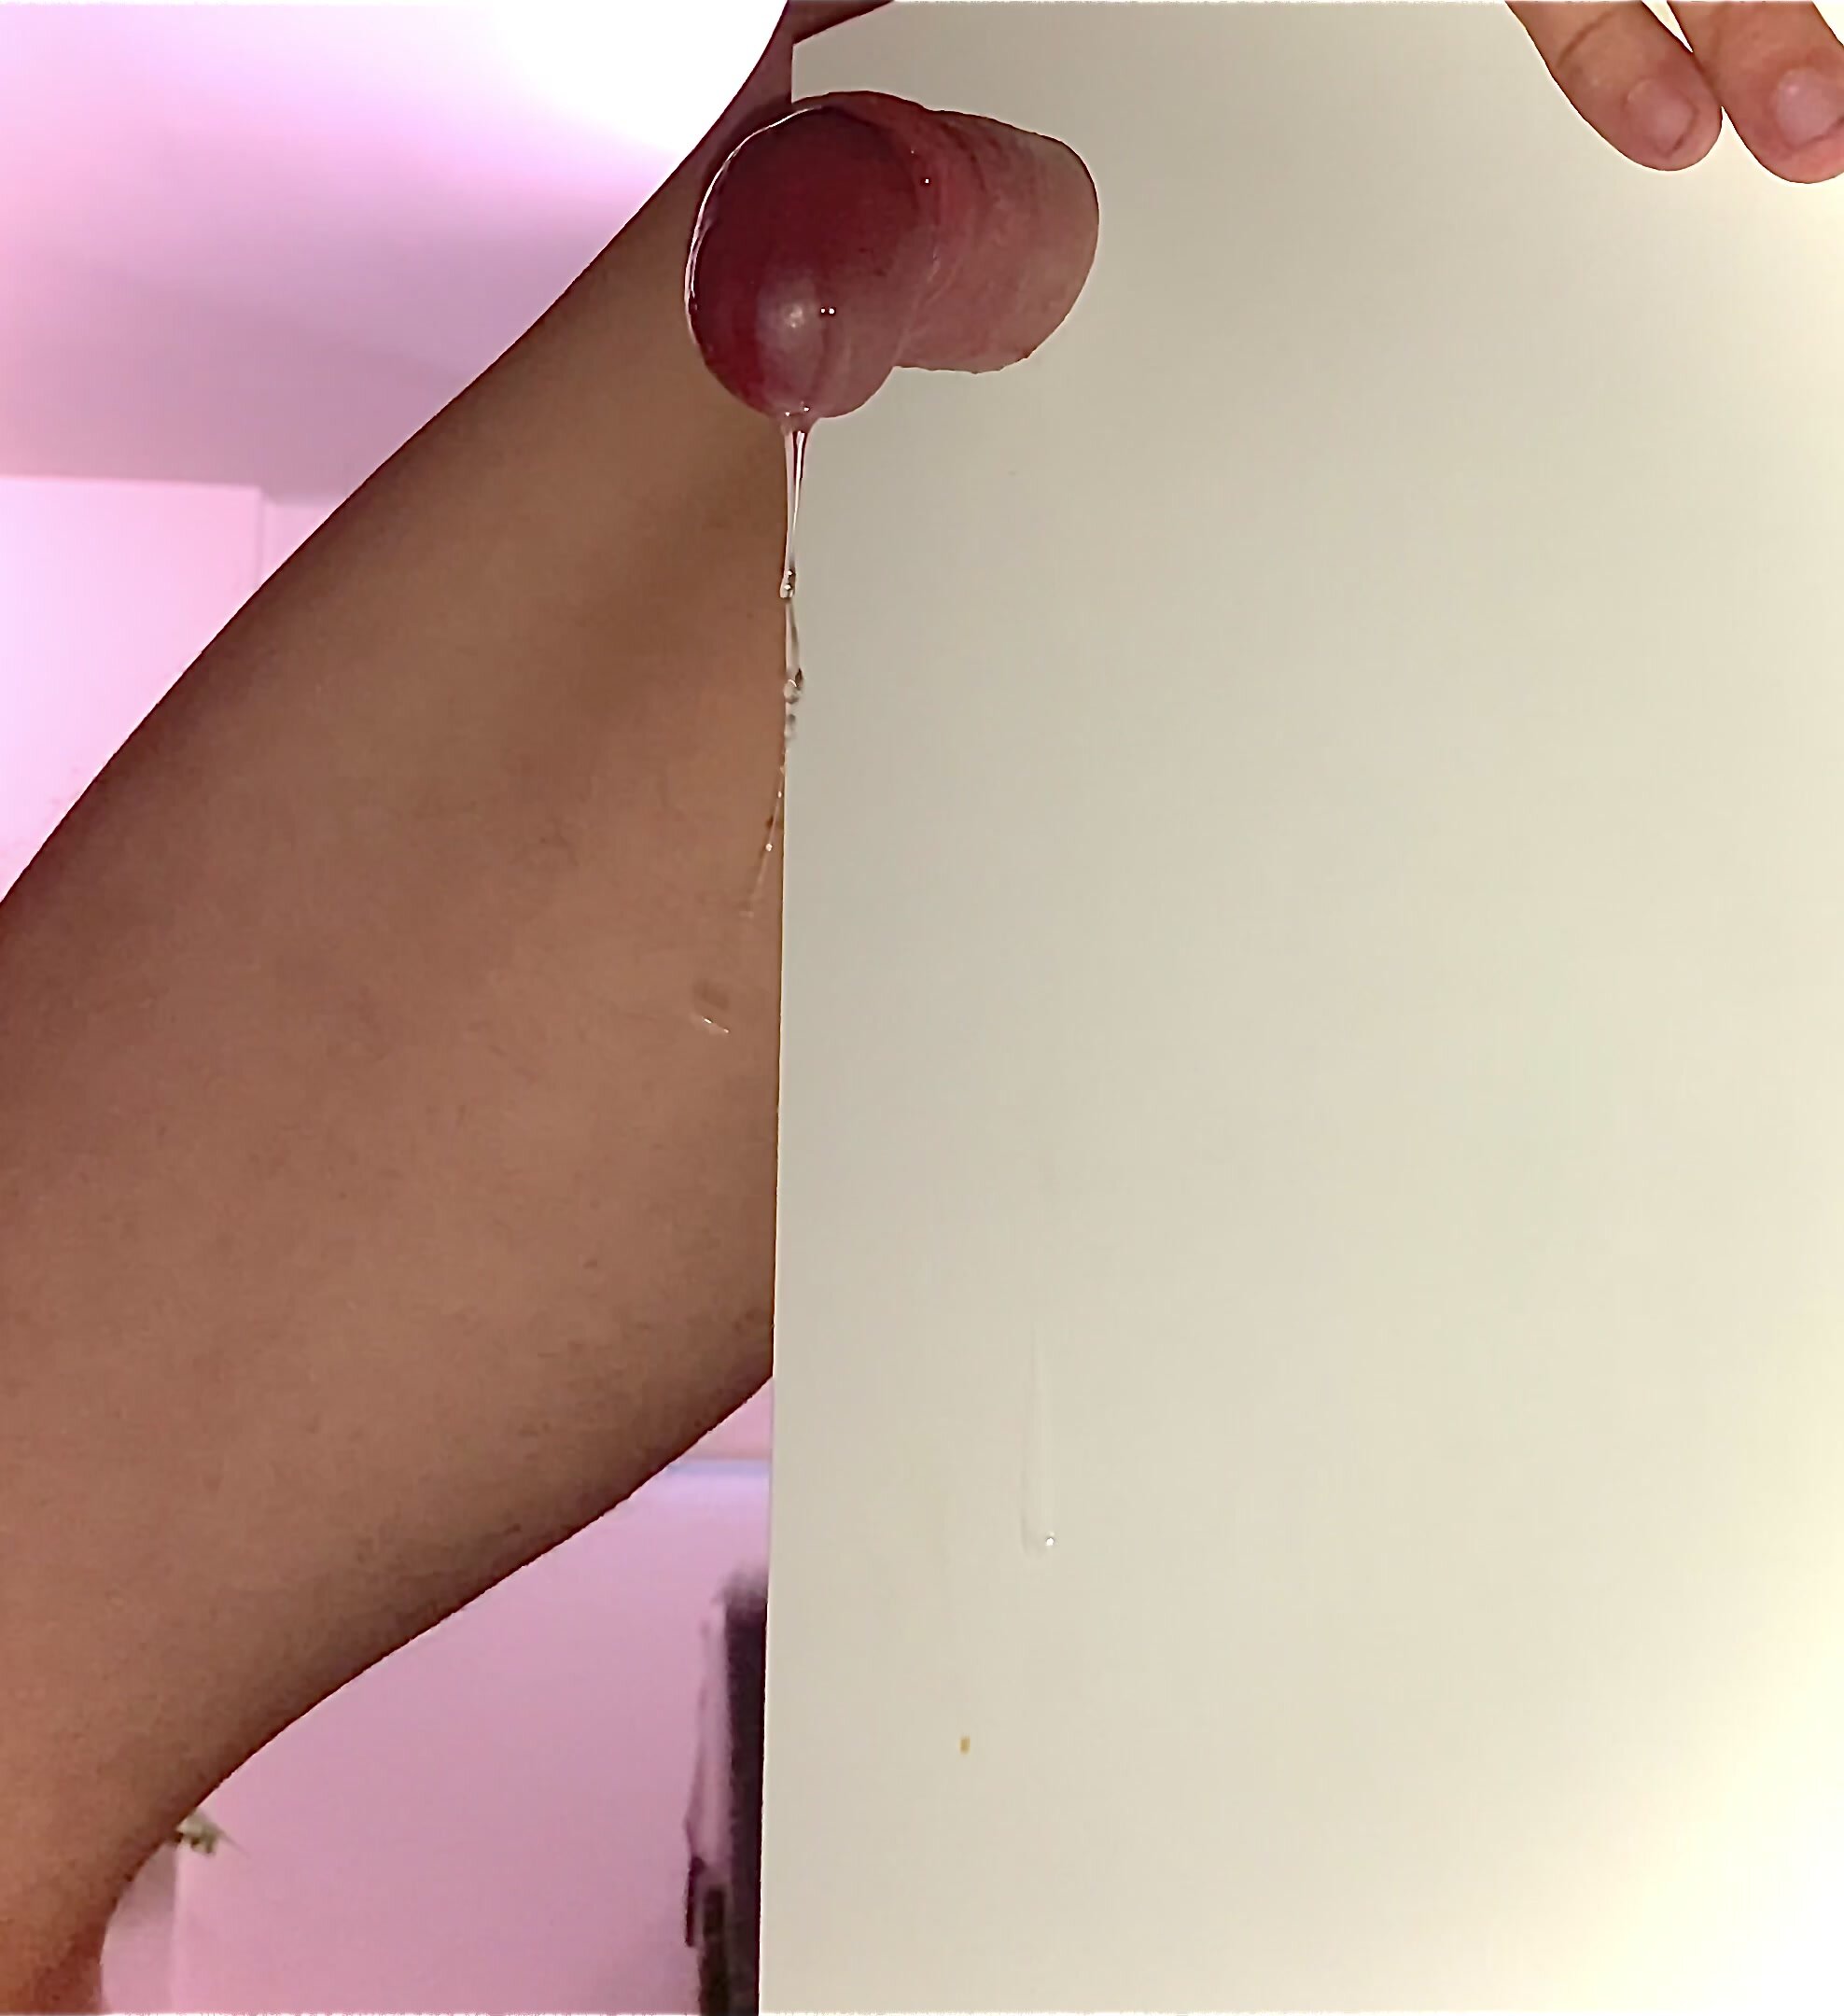 VERY edgy HUGE cum SHAKING legs - fucking a tight hole